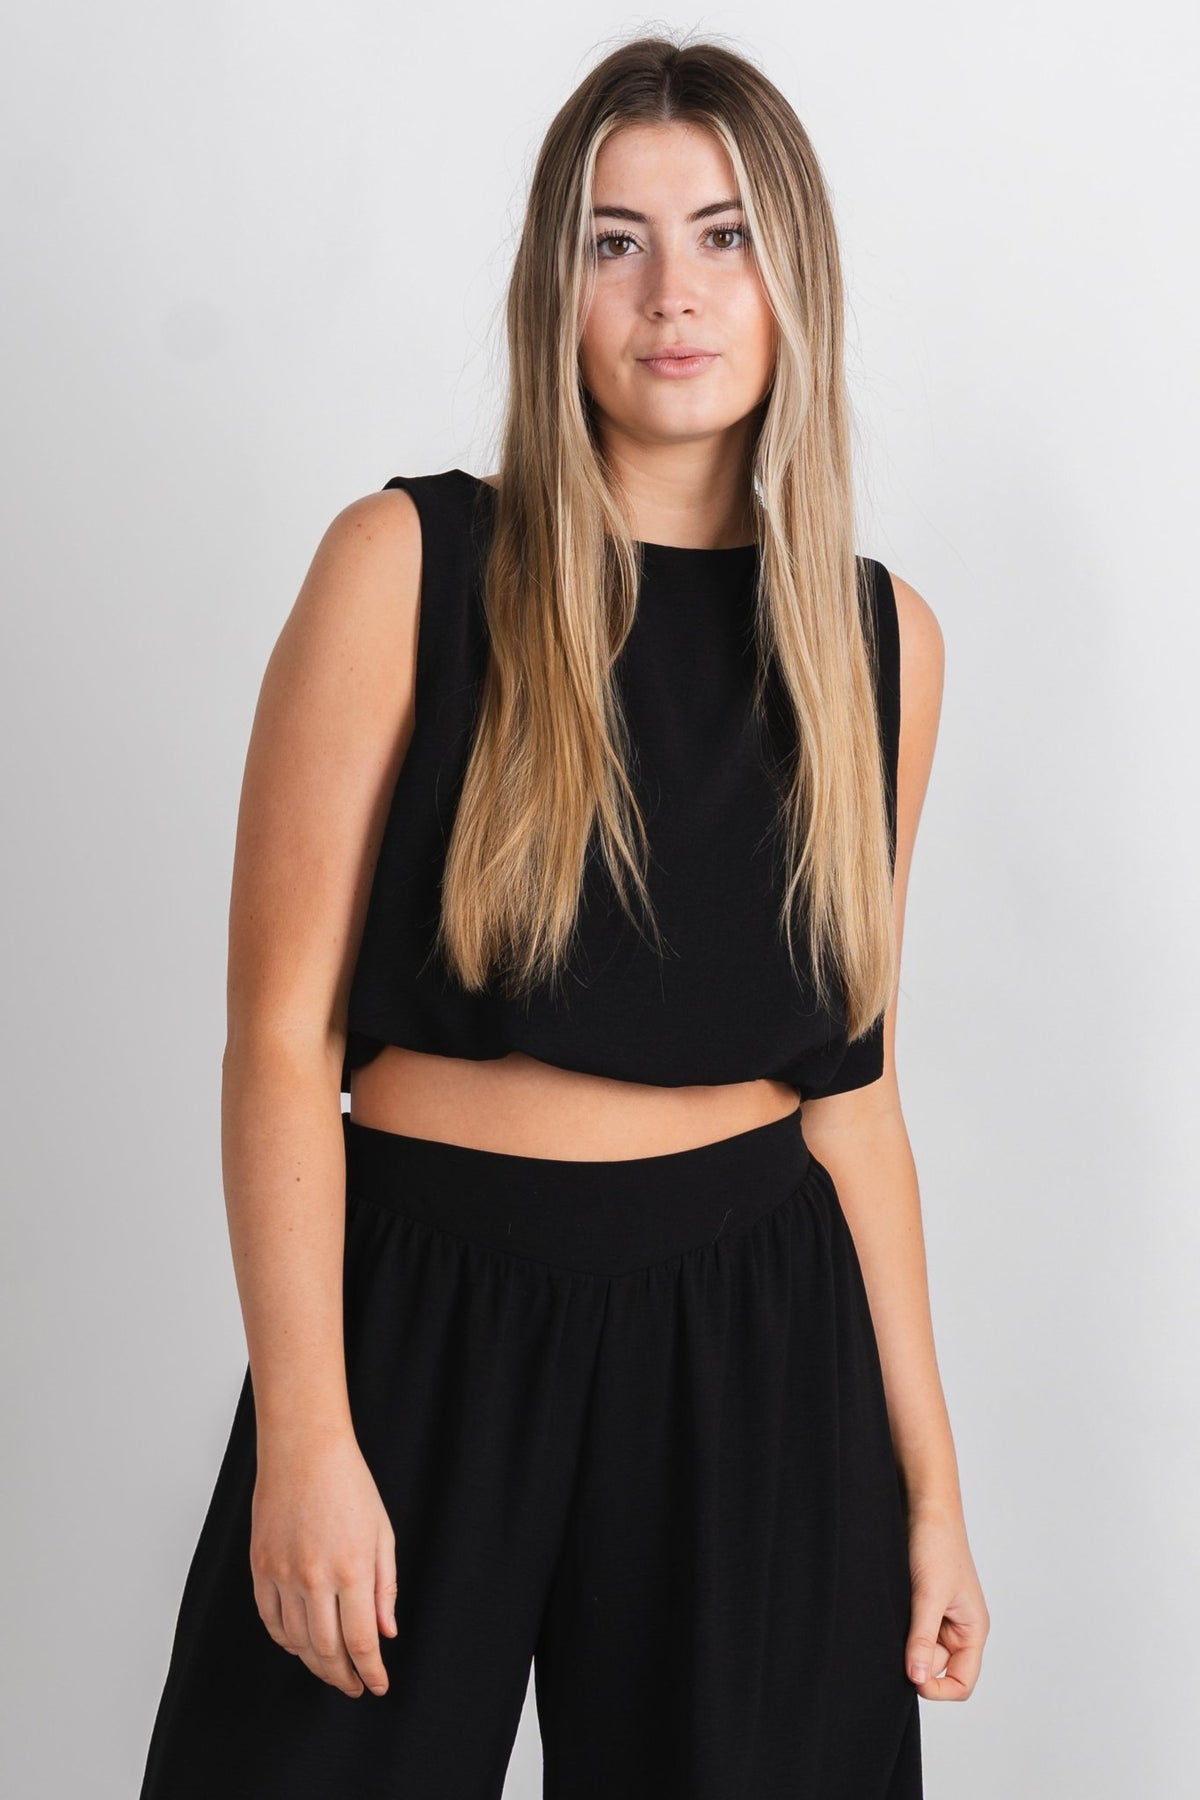 Sleeveless crop tank top black - Trendy tank top - Cute Vacation Collection at Lush Fashion Lounge Boutique in Oklahoma City